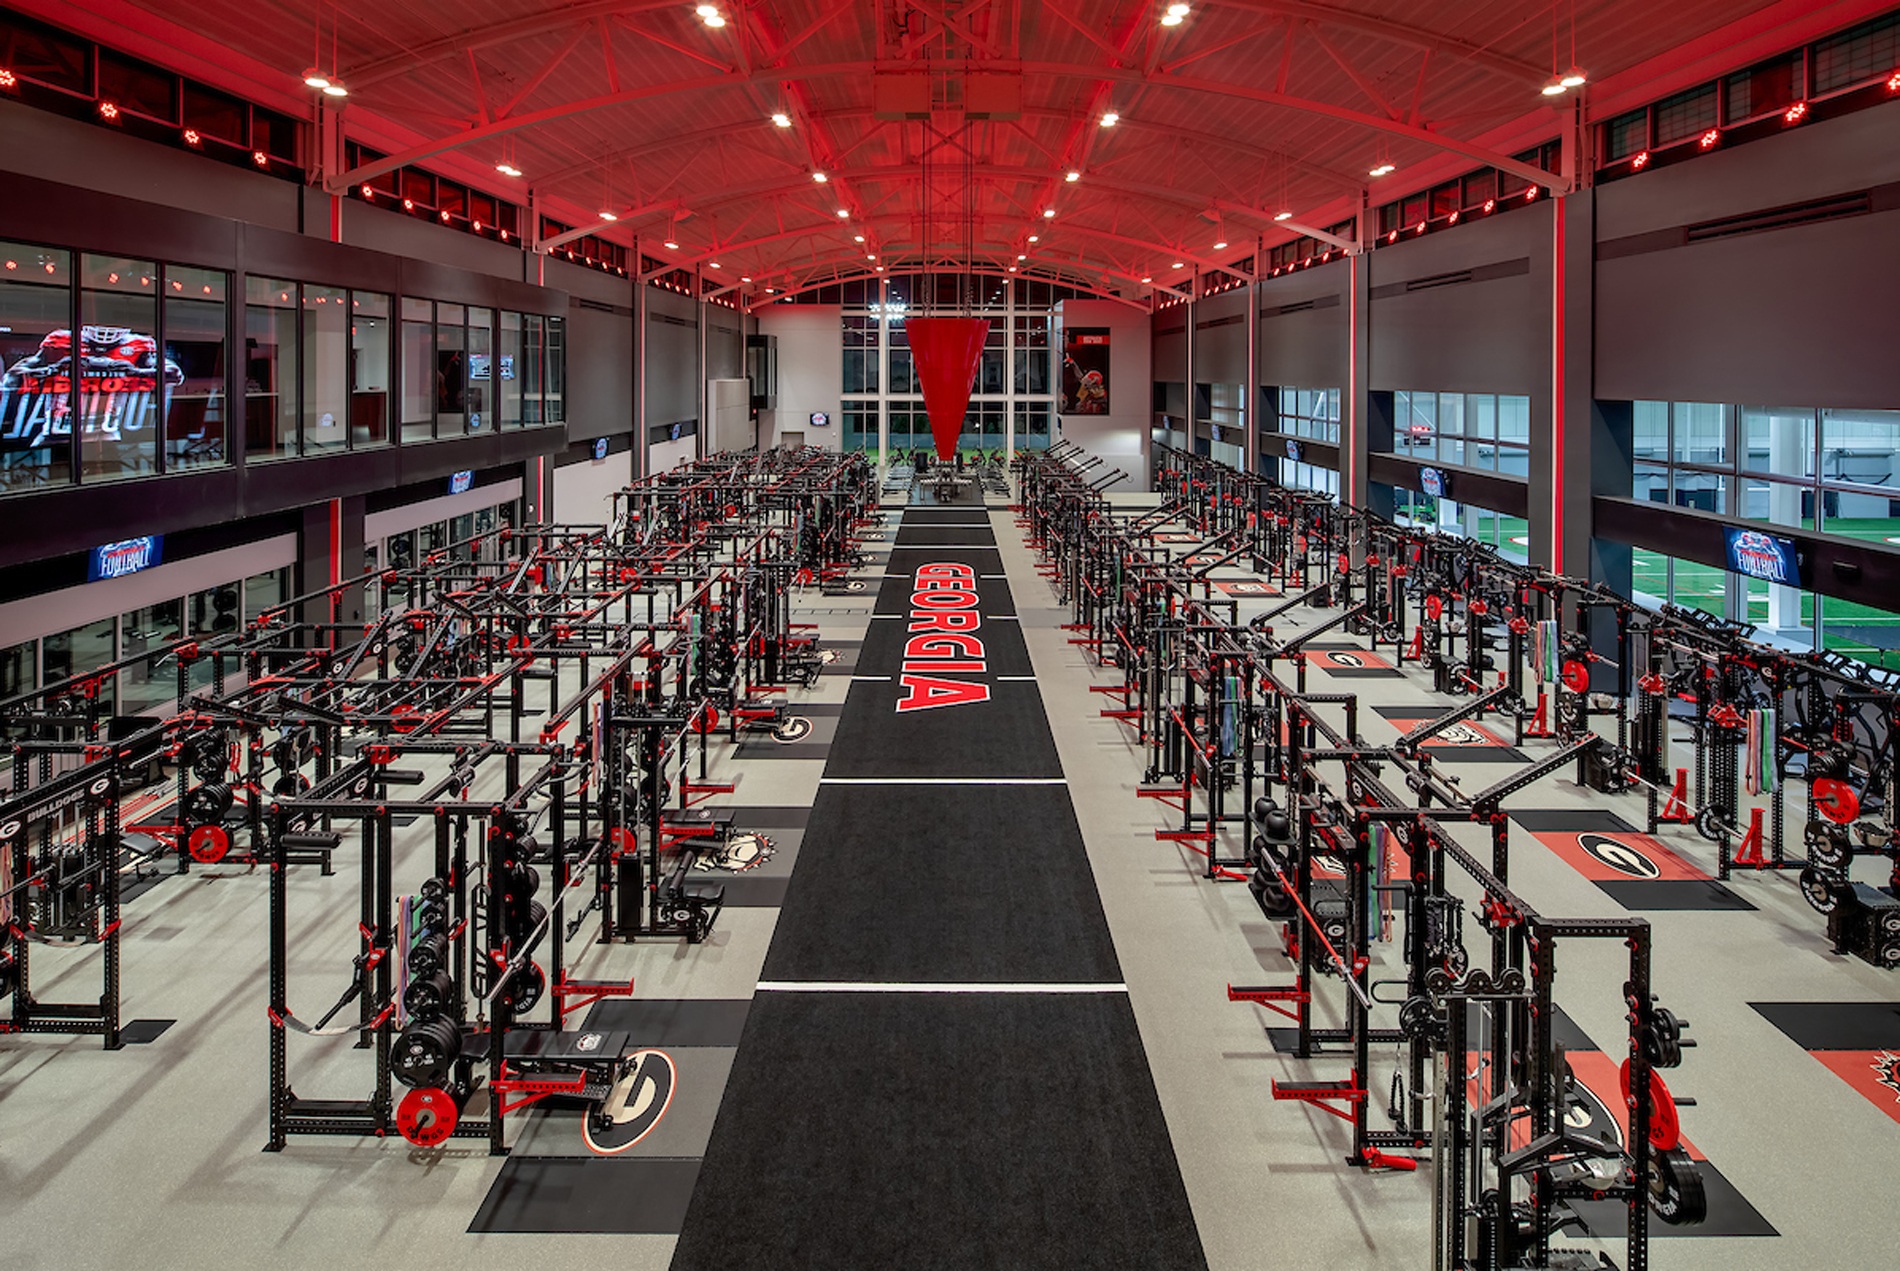 5 Tips for Designing Impactful College Football Training Facilities - HOK